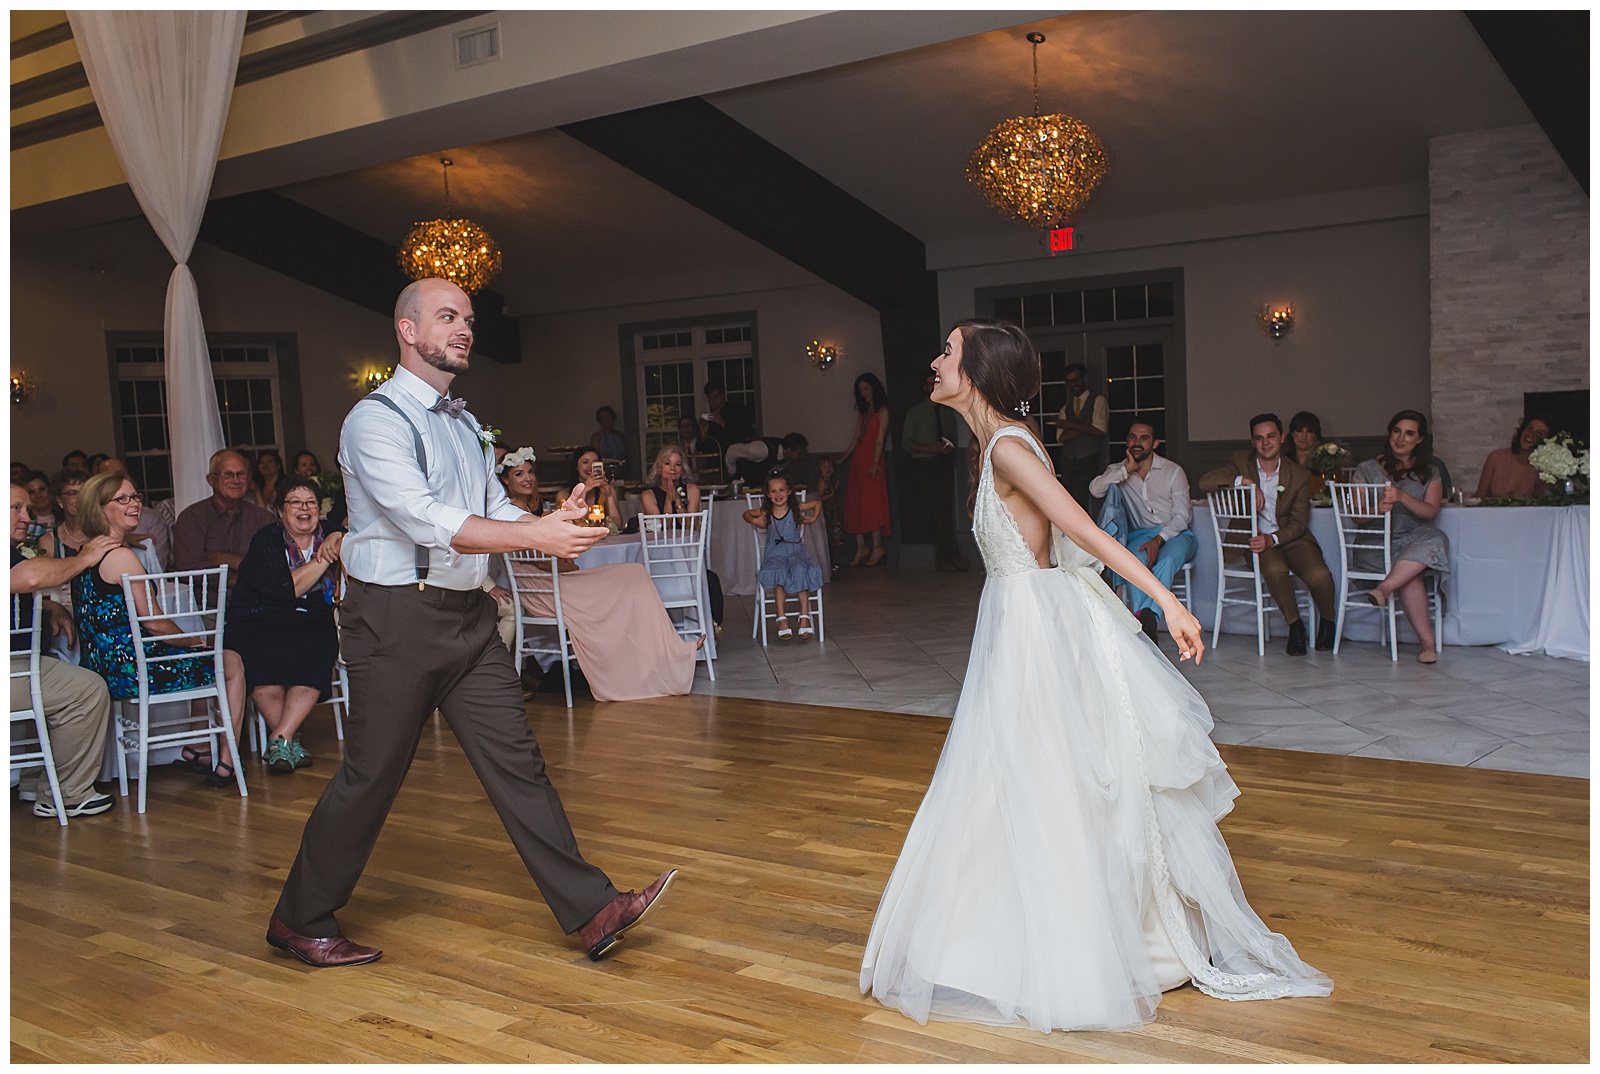 Wedding photography and videography at Eighteen Ninety in Platte City, Missouri, by Kansas City wedding photographers Wisdom-Watson Weddings.